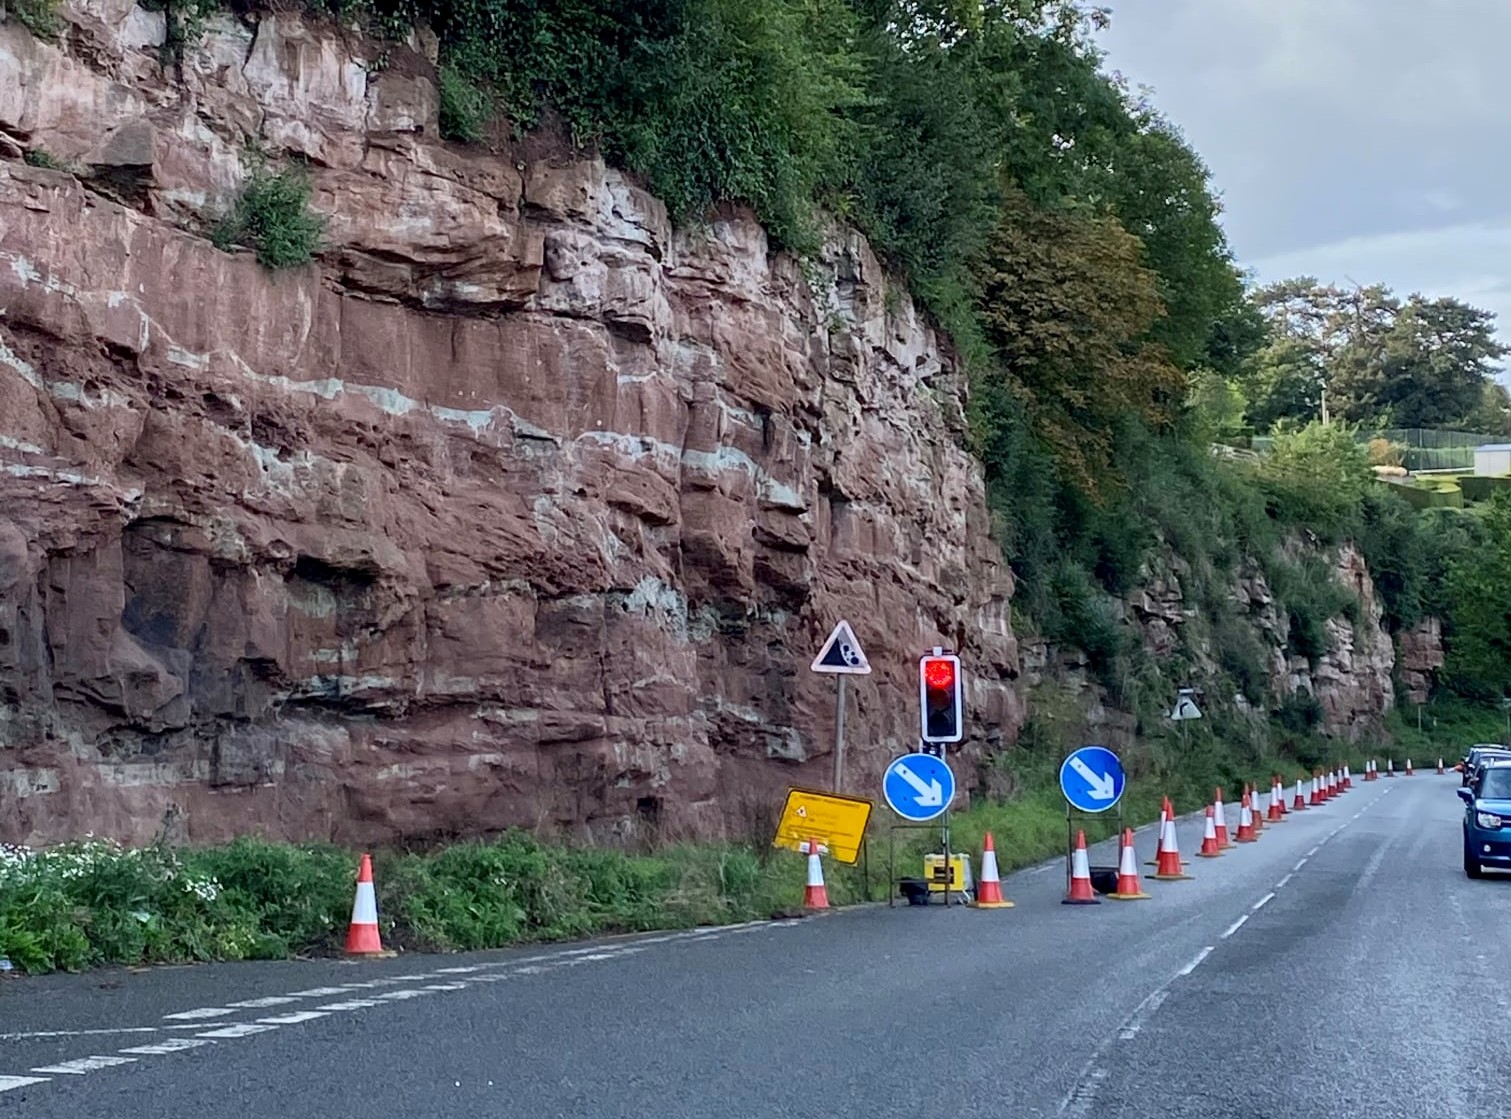 NEWS | Parking restrictions to be in force for 42 days in Ross-on-Wye for repairs to be made due to risk of rockfall